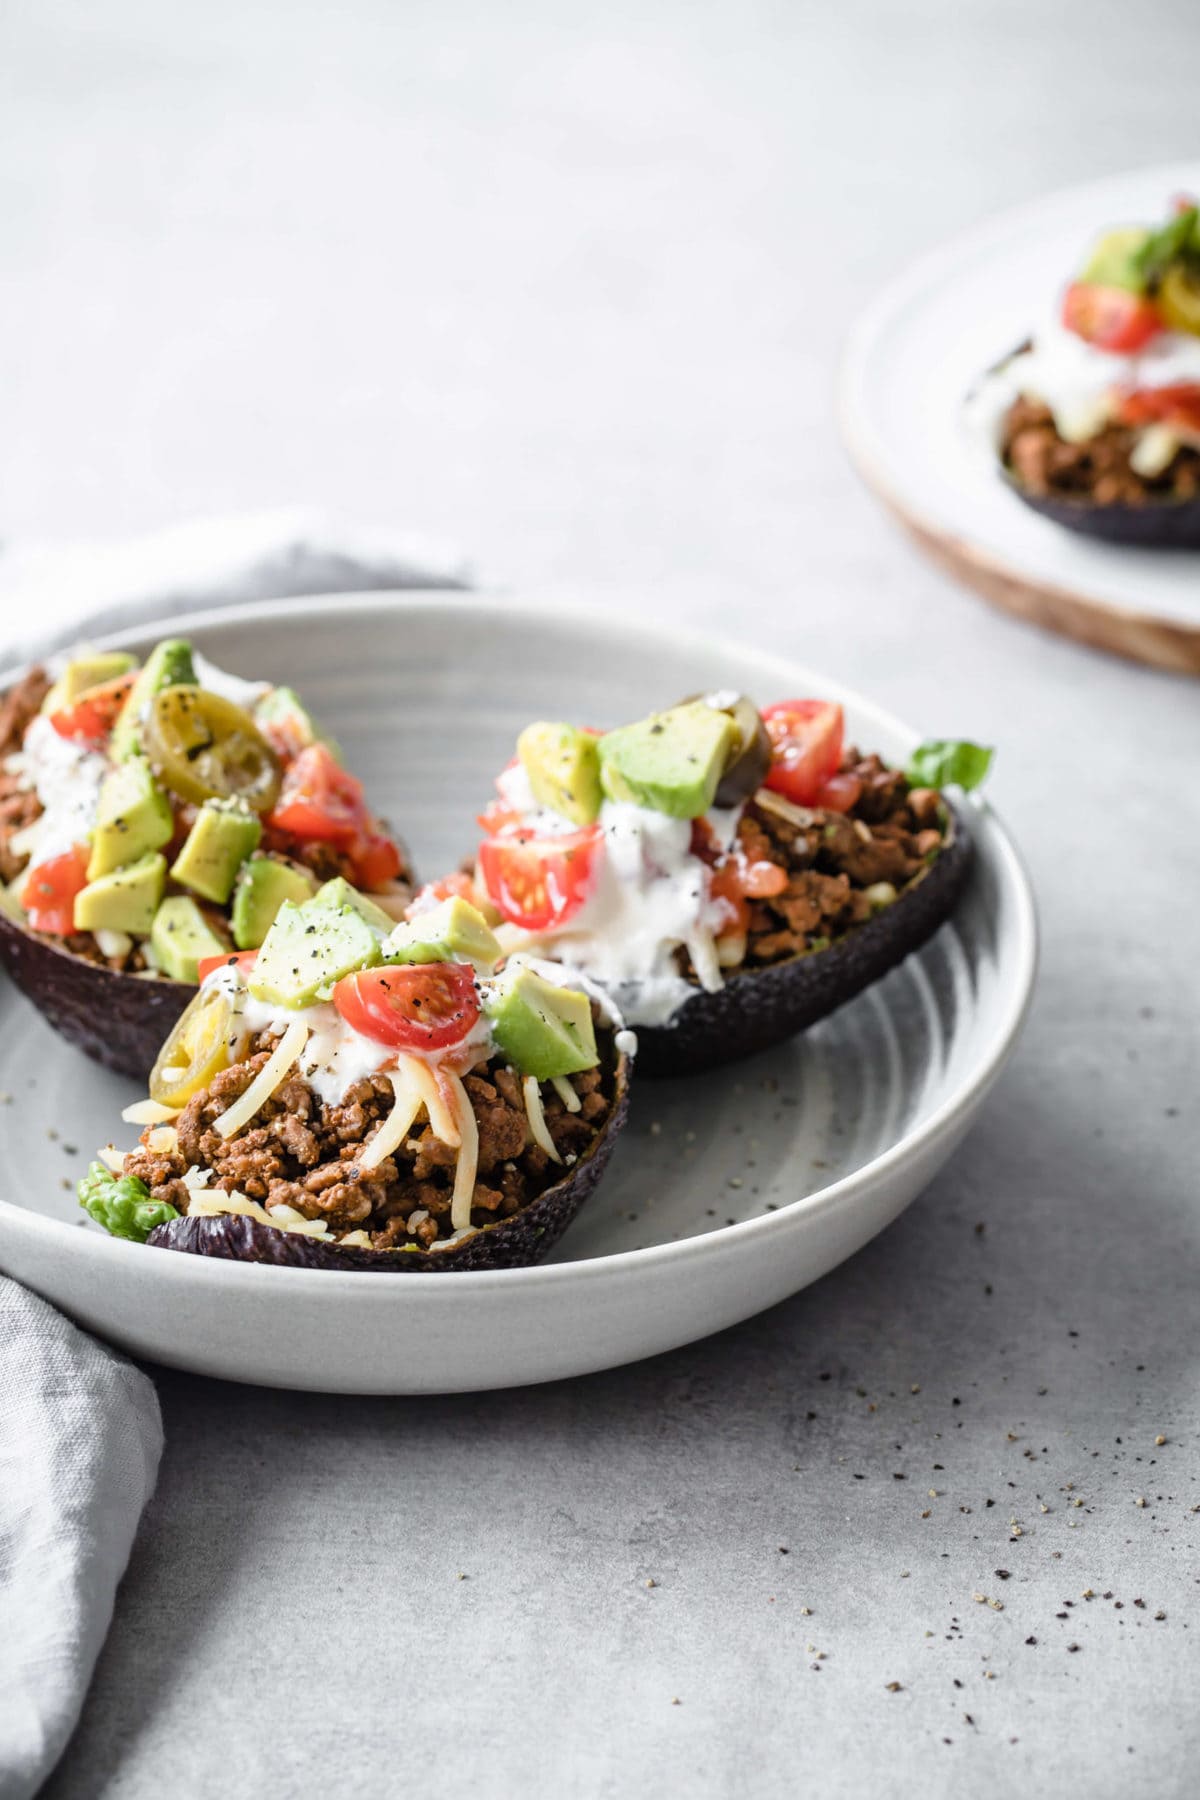 The Keto Avocado Taco Boats are the perfect way to level up your low carb Taco Tuesday Routine. They are fresh, light, and fun!